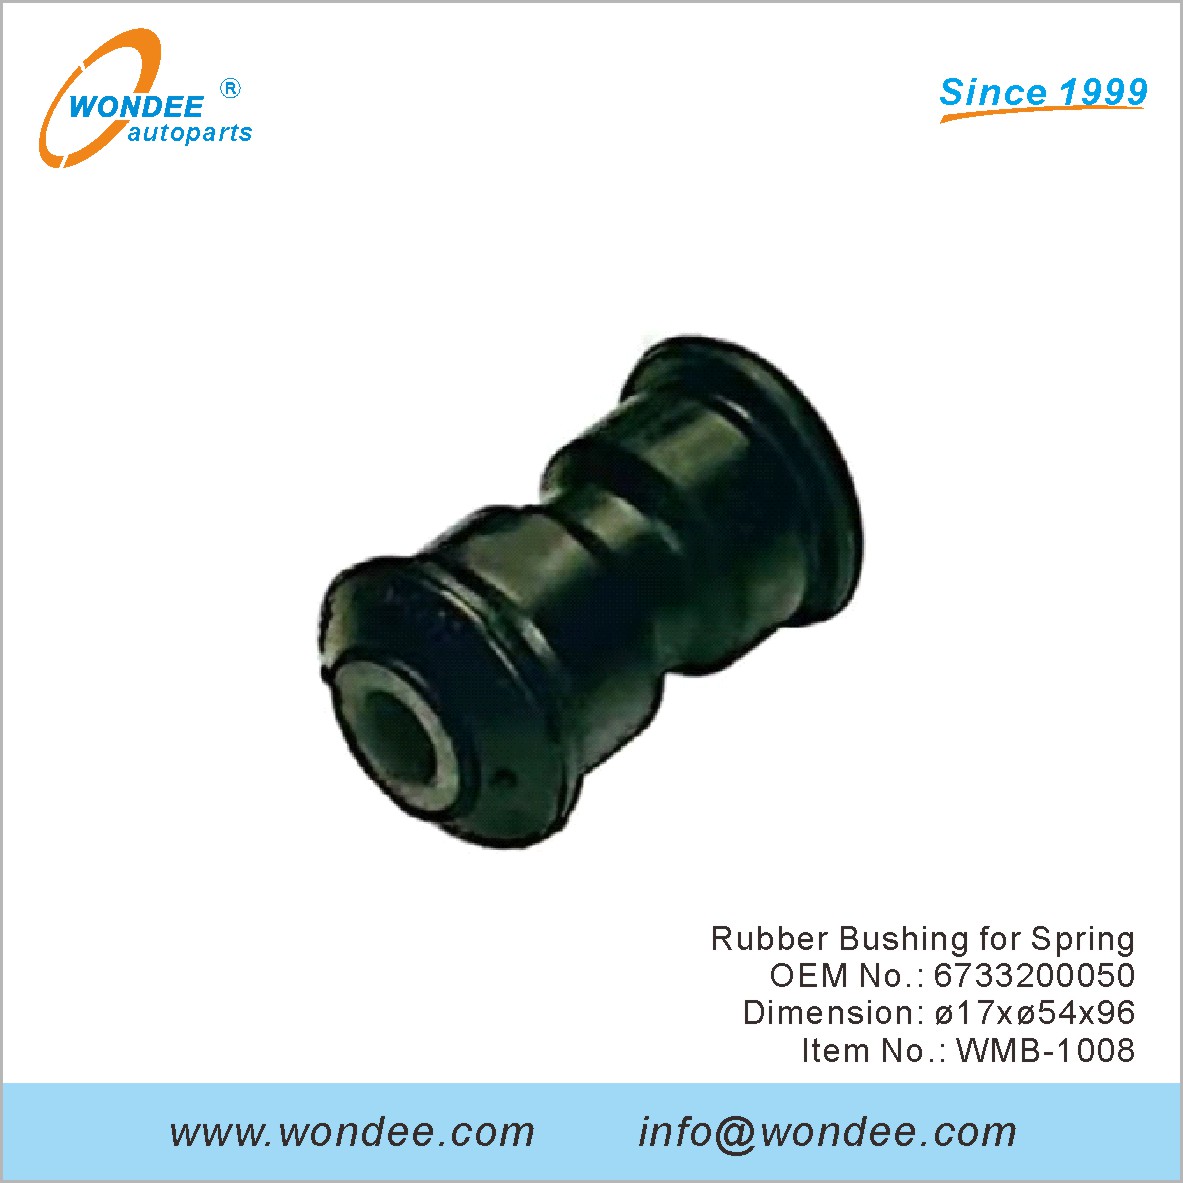 Rubber Bushing for Spring OEM 6733200050 for Benz from WONDEE